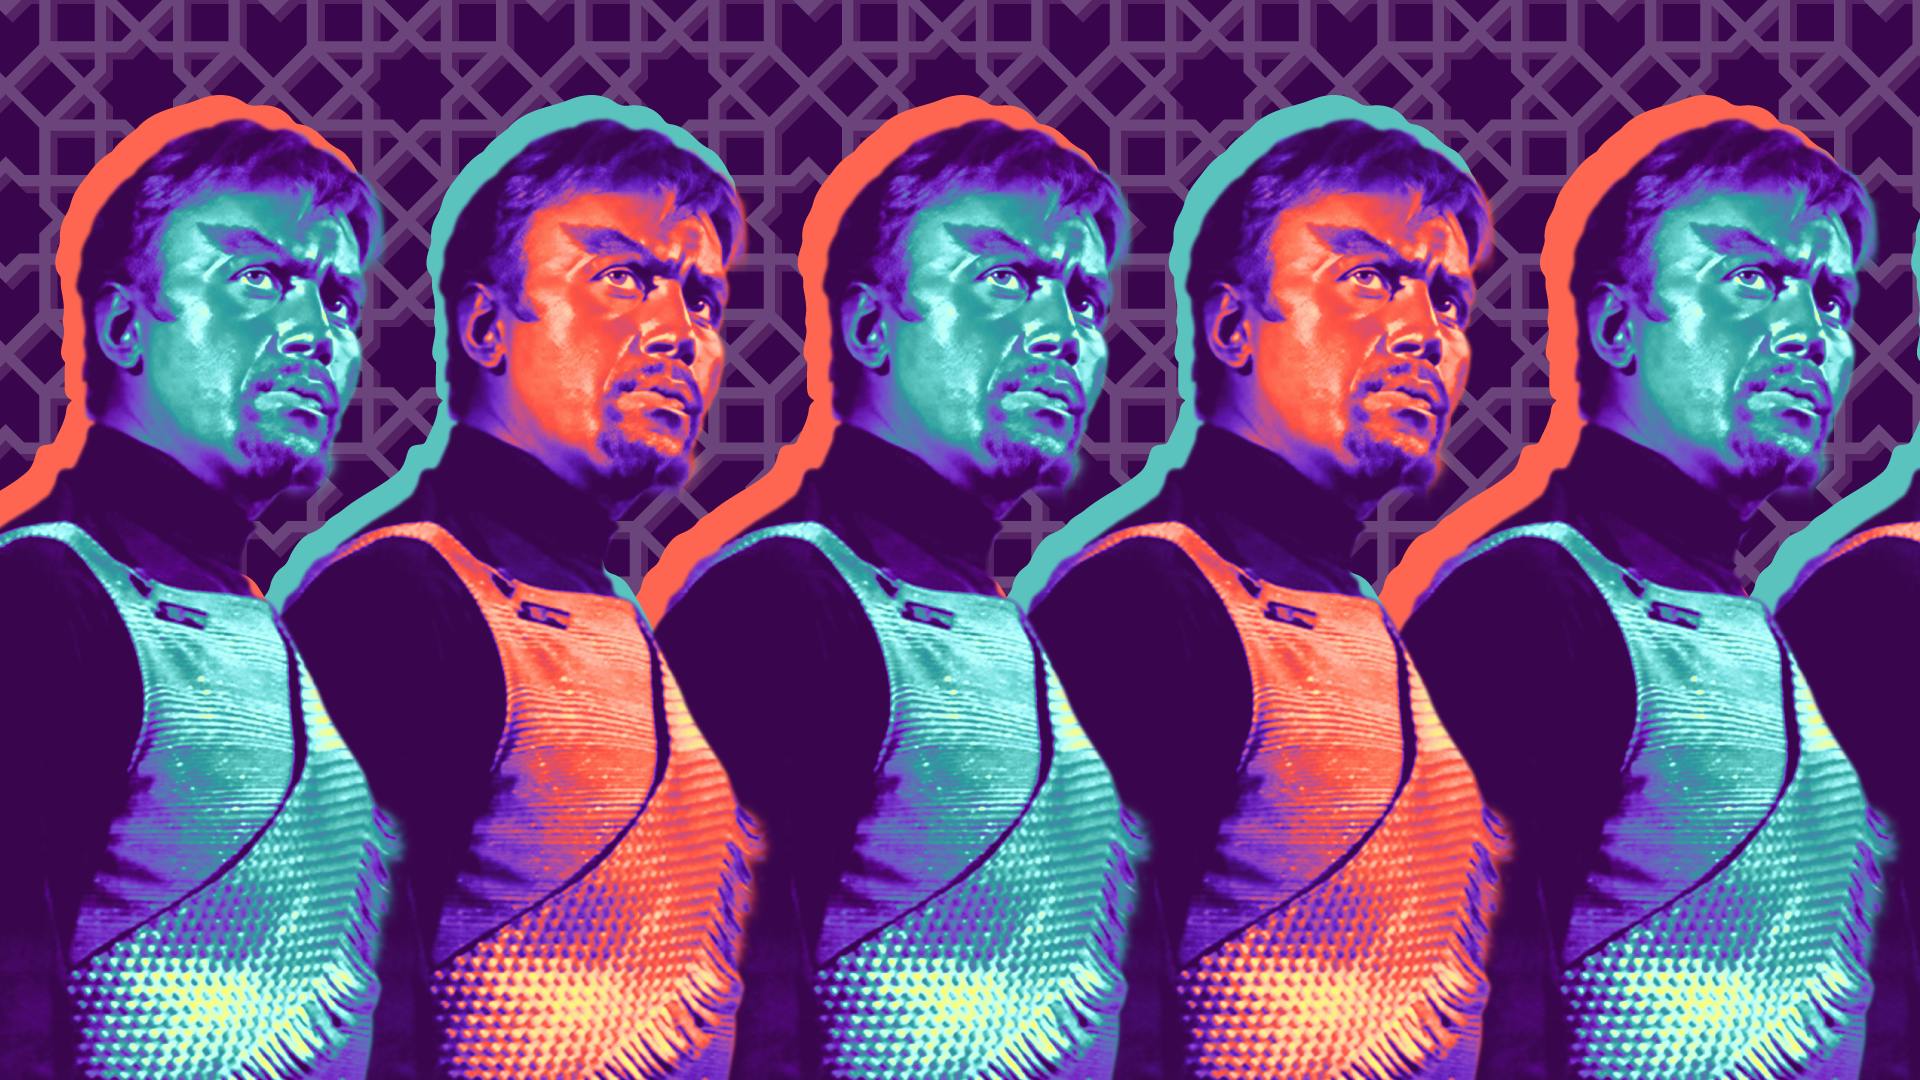 Stylized and filtered image of Michael Ansara as Commander Kang